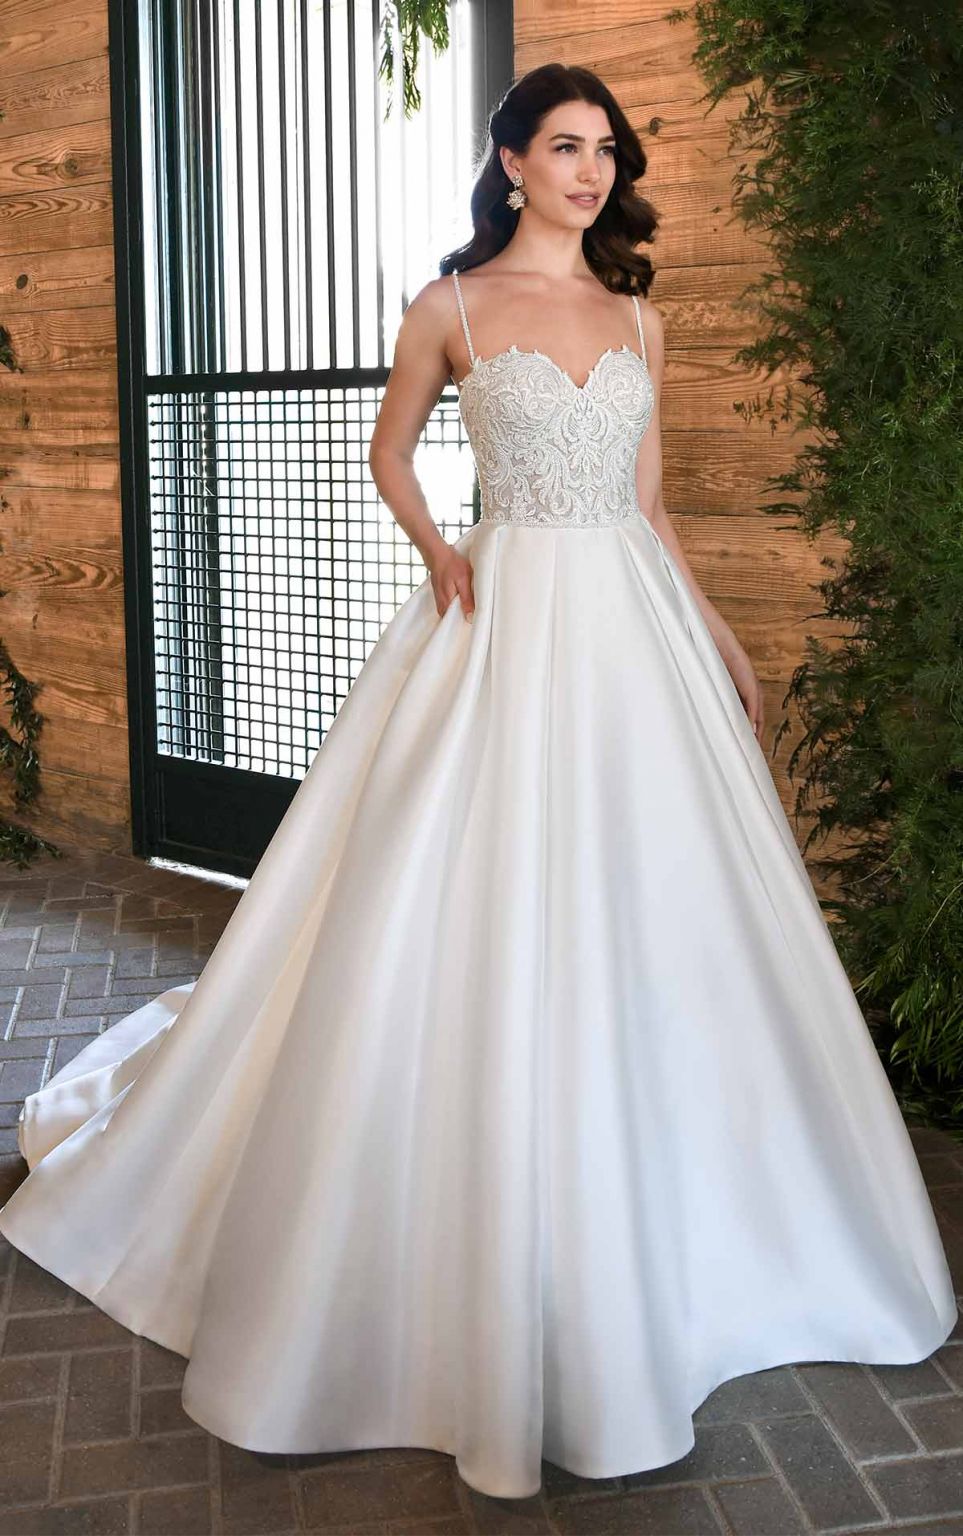 Traditional Ball Gown with Embellished Boat Neck